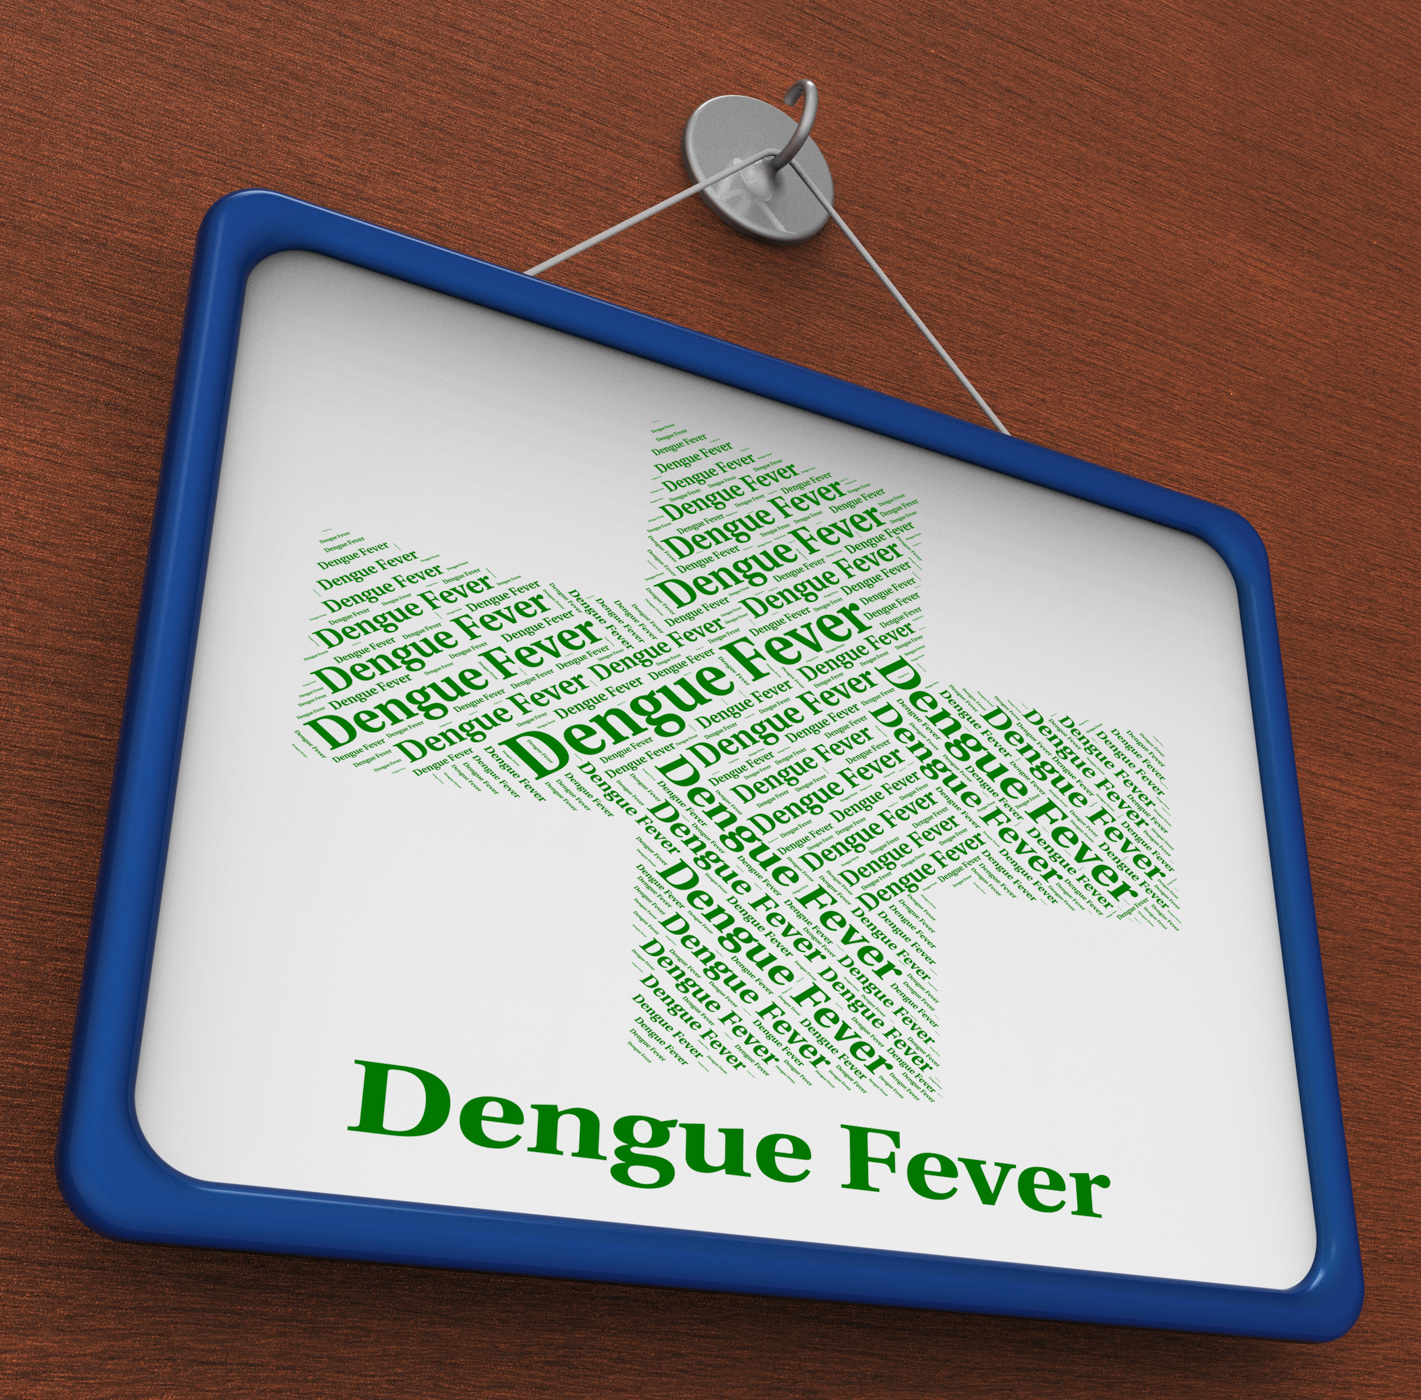 Dengue Fever Shows Burning Up And Afflictions, Illness, Sickness, Sick, Shivering, HQ Photo